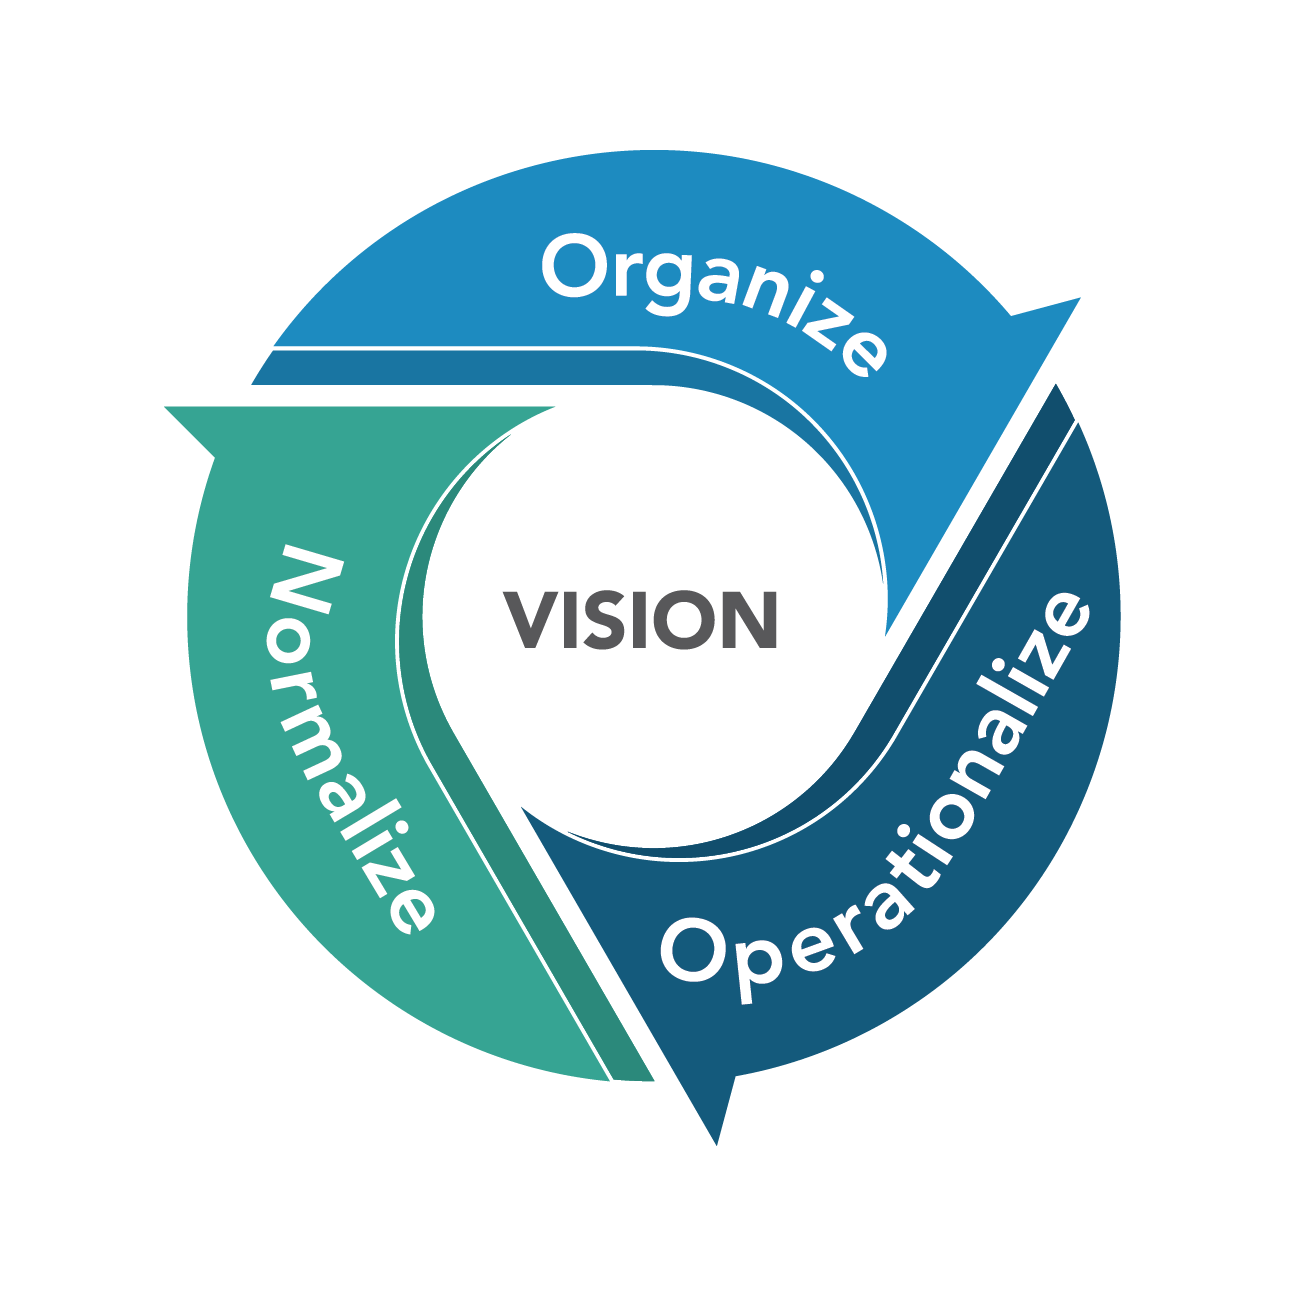 Model of Change Vision - Normalize, Organize, Operationalize